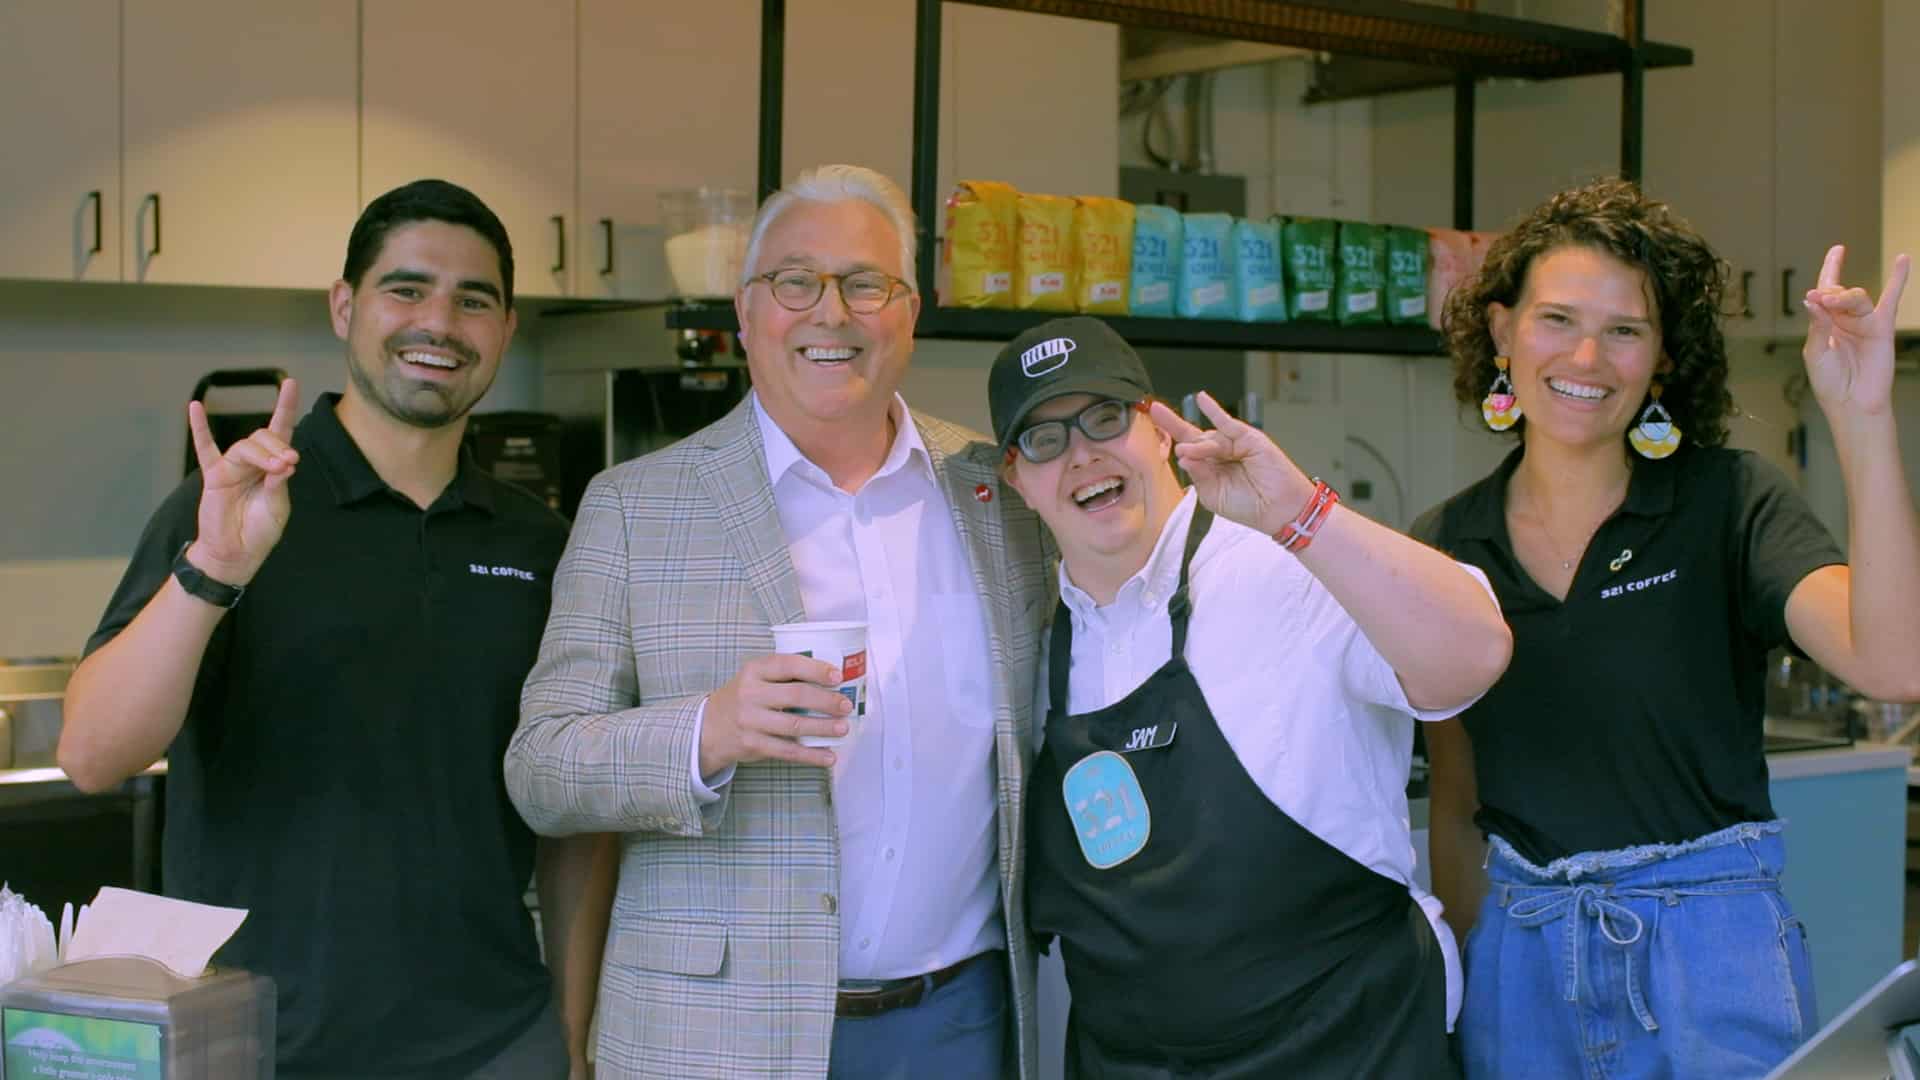 Chancellor Woodson poses for a photo in the downtown Raleigh 321 Coffee shop with barista Sam and co-founder Laurie Henes to his left and co-founder Michael Evans to his right.